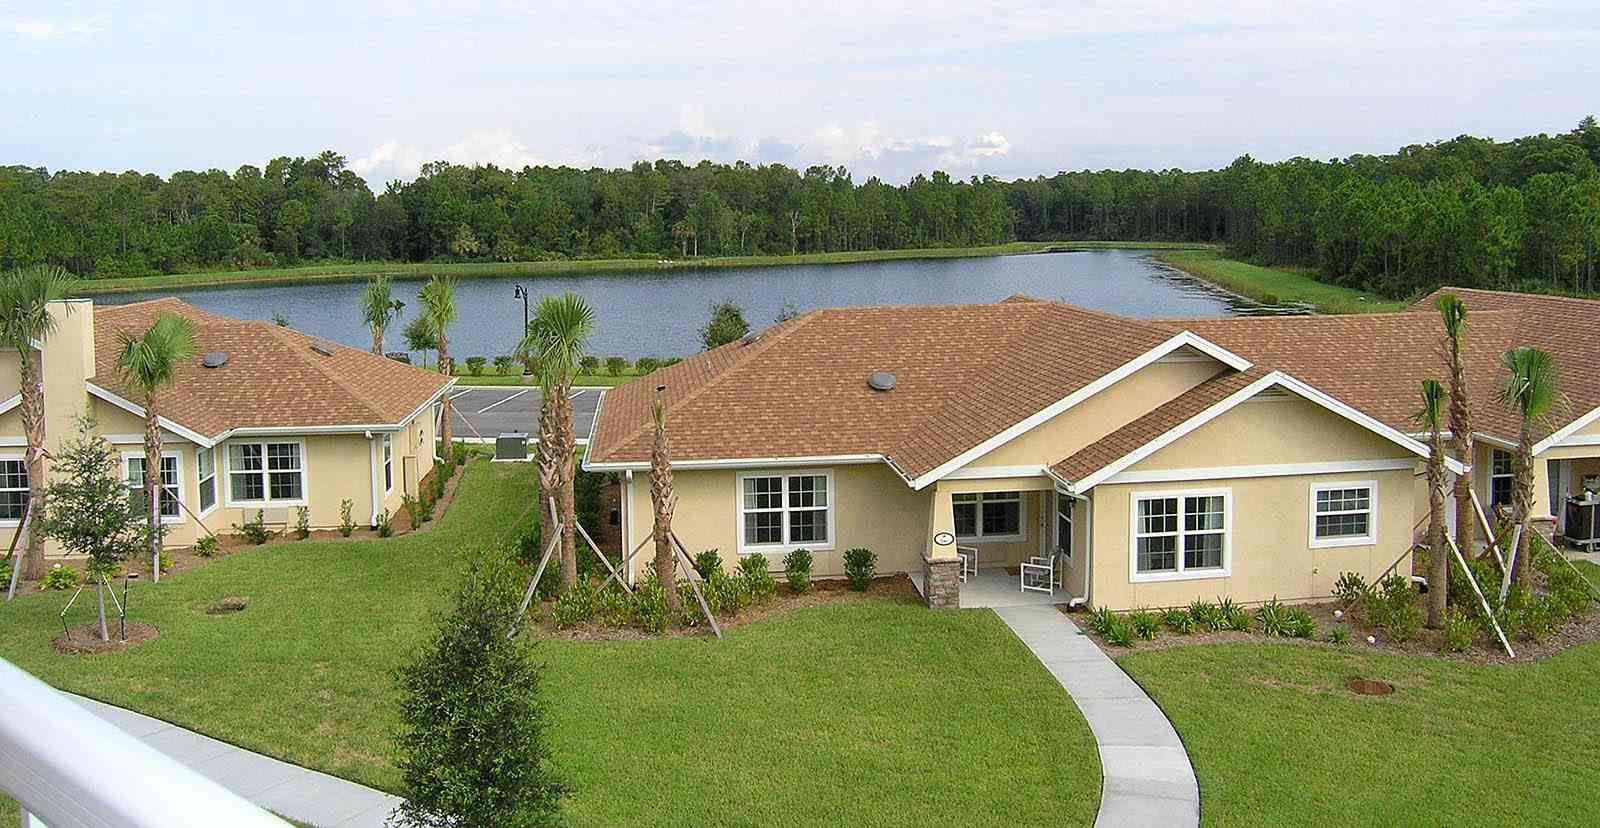 Senior living community in Las Palmas with scenic waterfront, lush grass, and plant life.